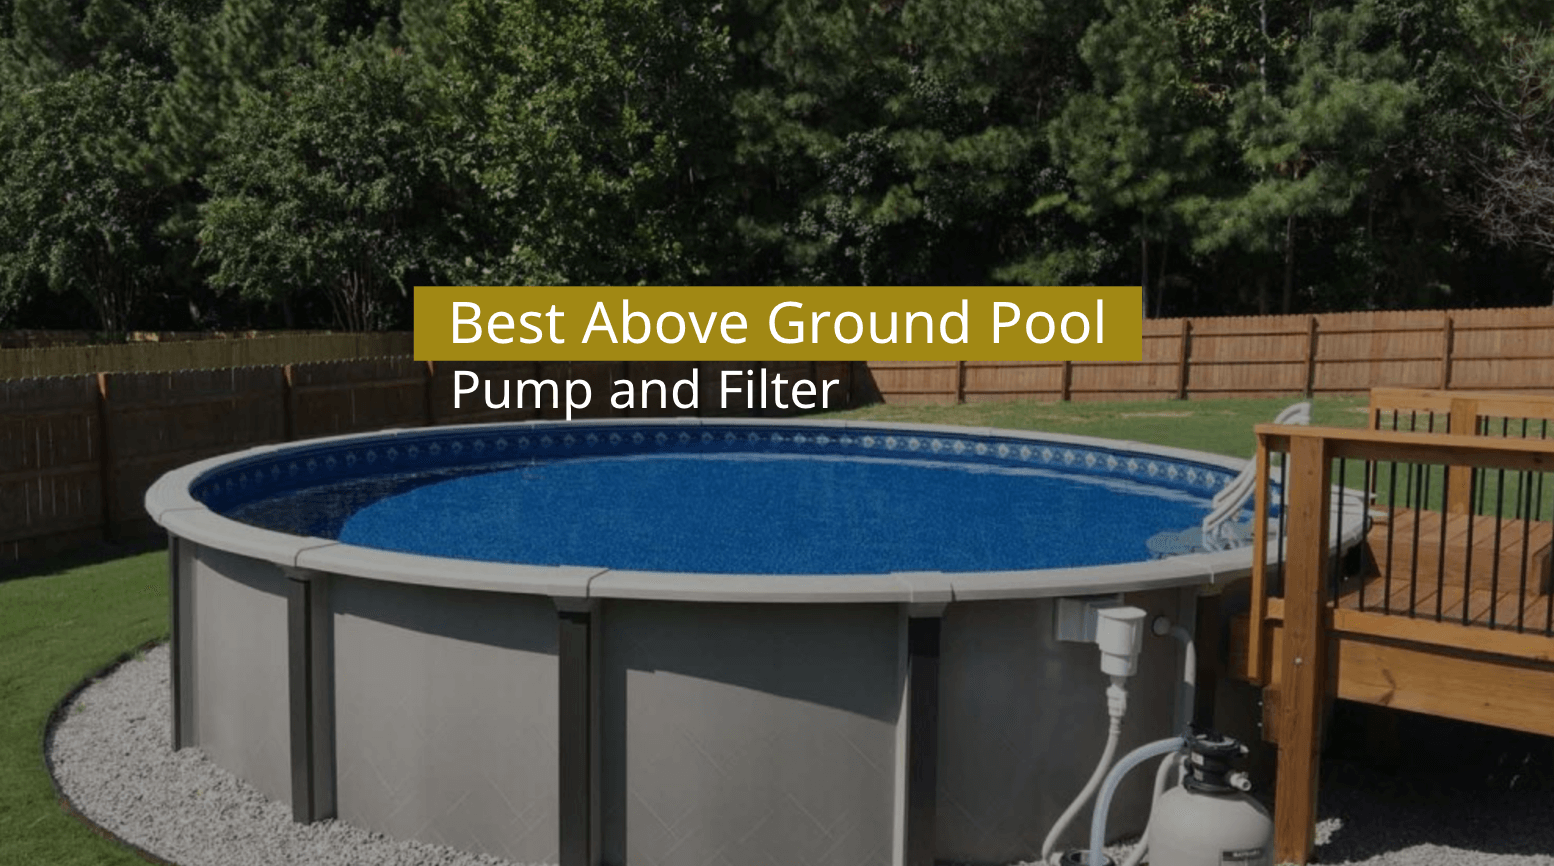 Best Above Ground Pool Pump and Filter in 2022- Our Top Picks